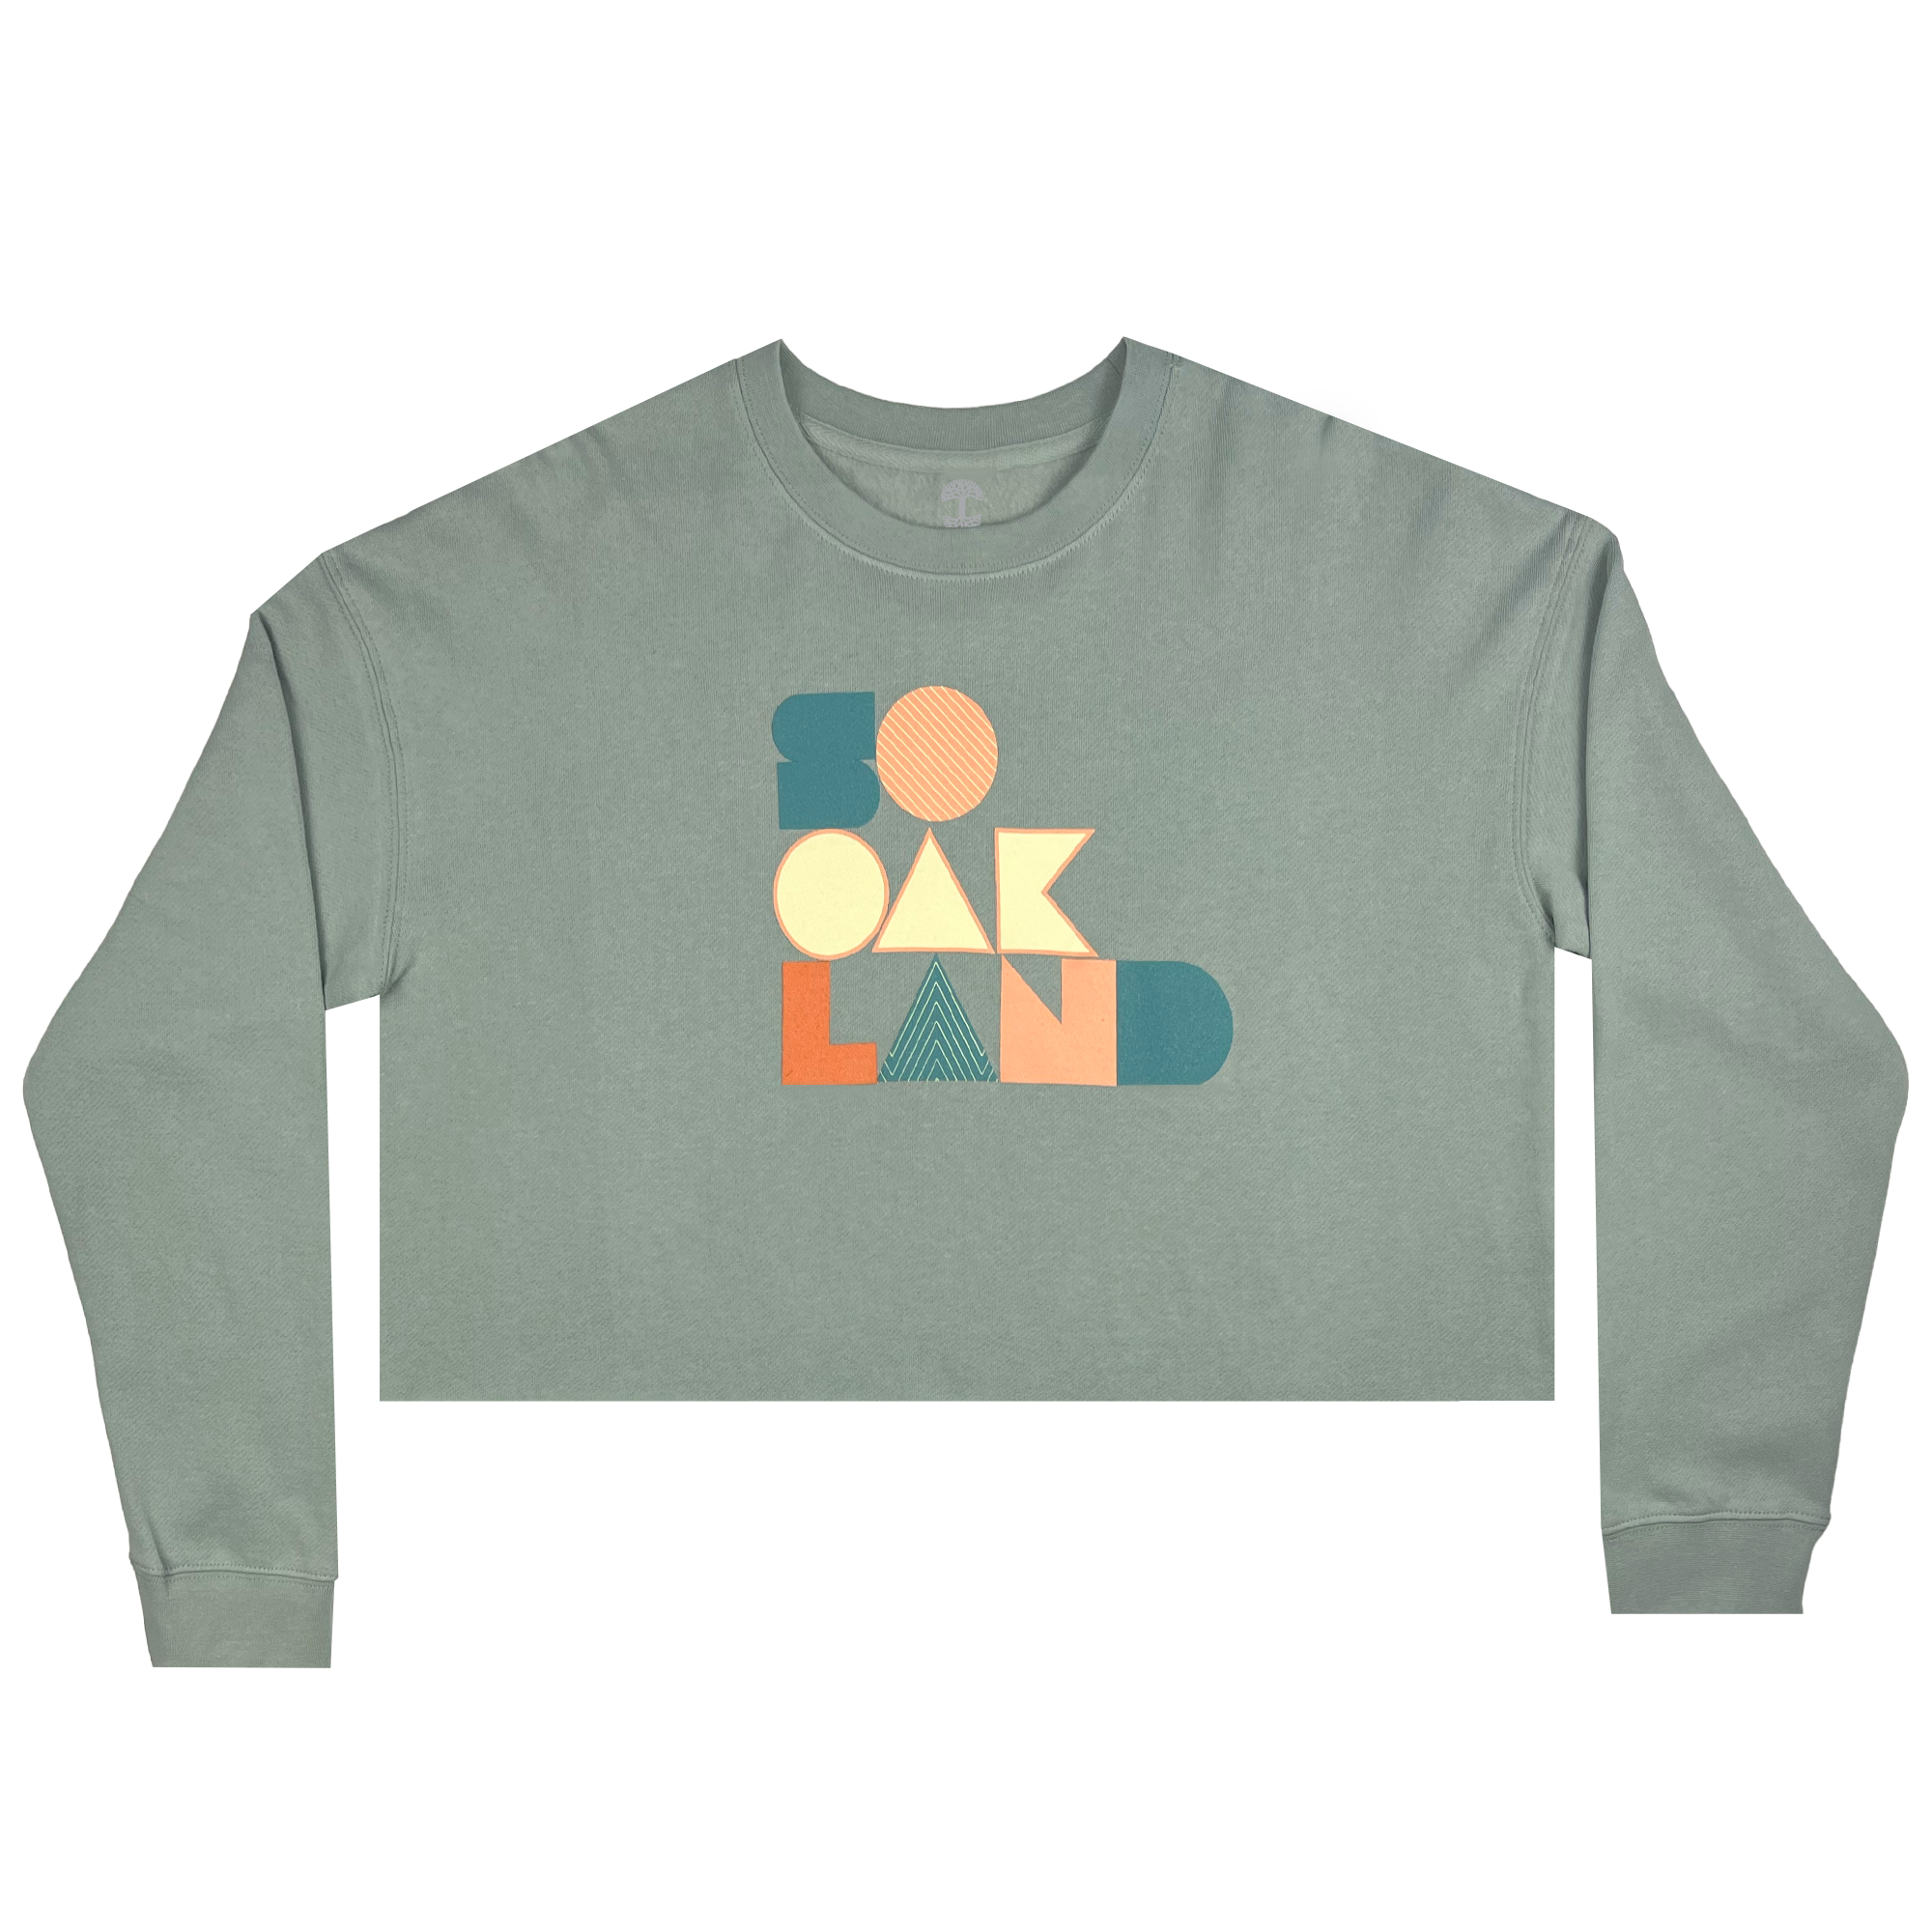 Cropped crewneck sage green sweatshirt with a full-color SOOAKLAND graphic wordmark on the front chest.